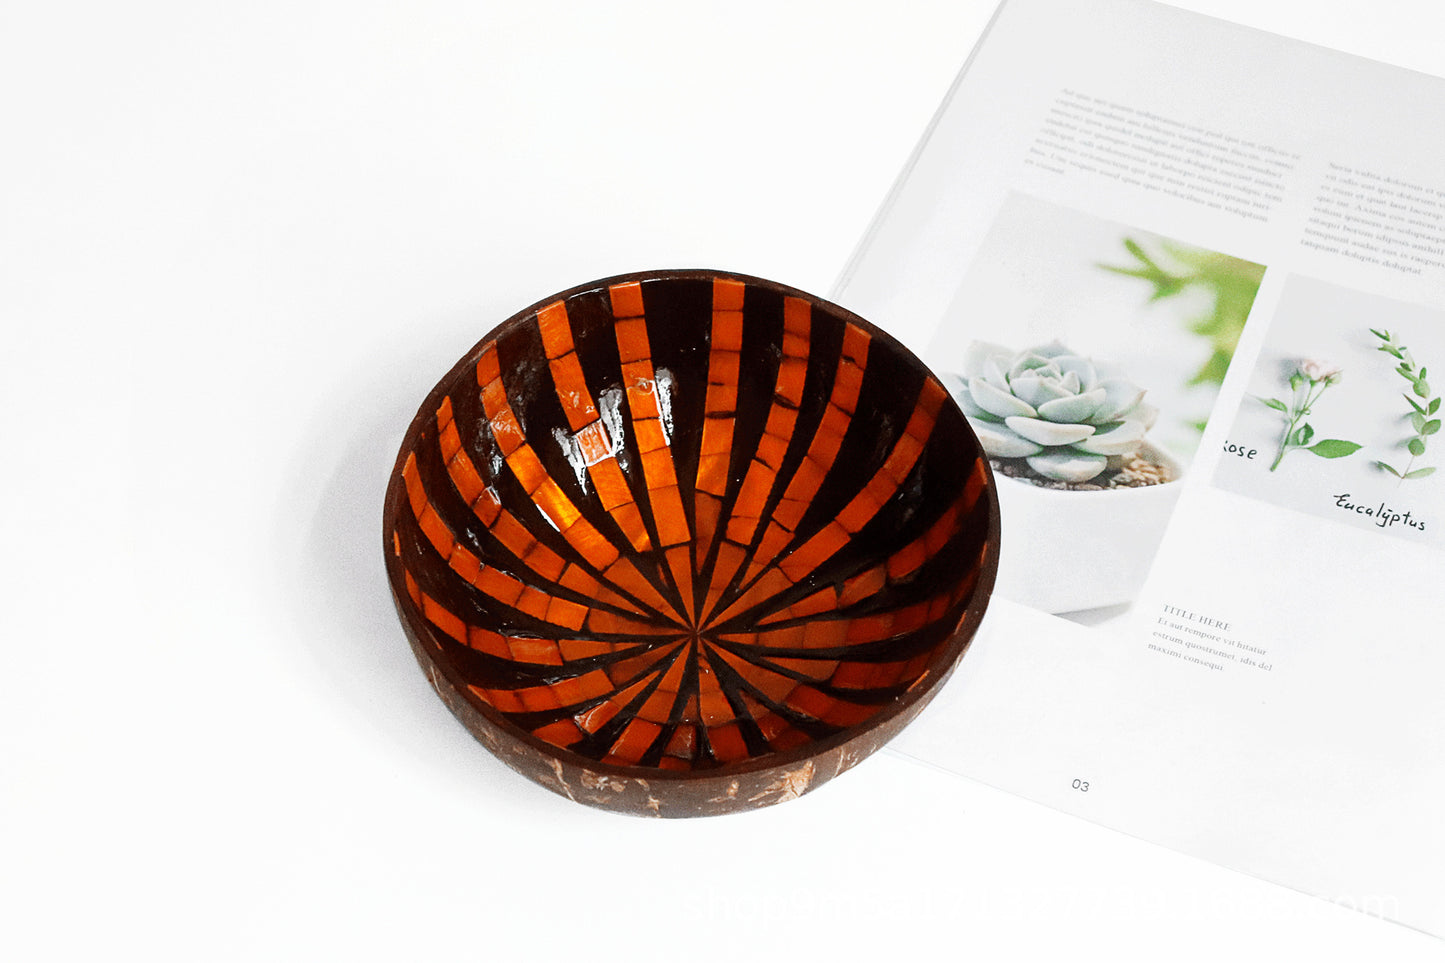 Beautiful Coconut Crafted Decorative bowl